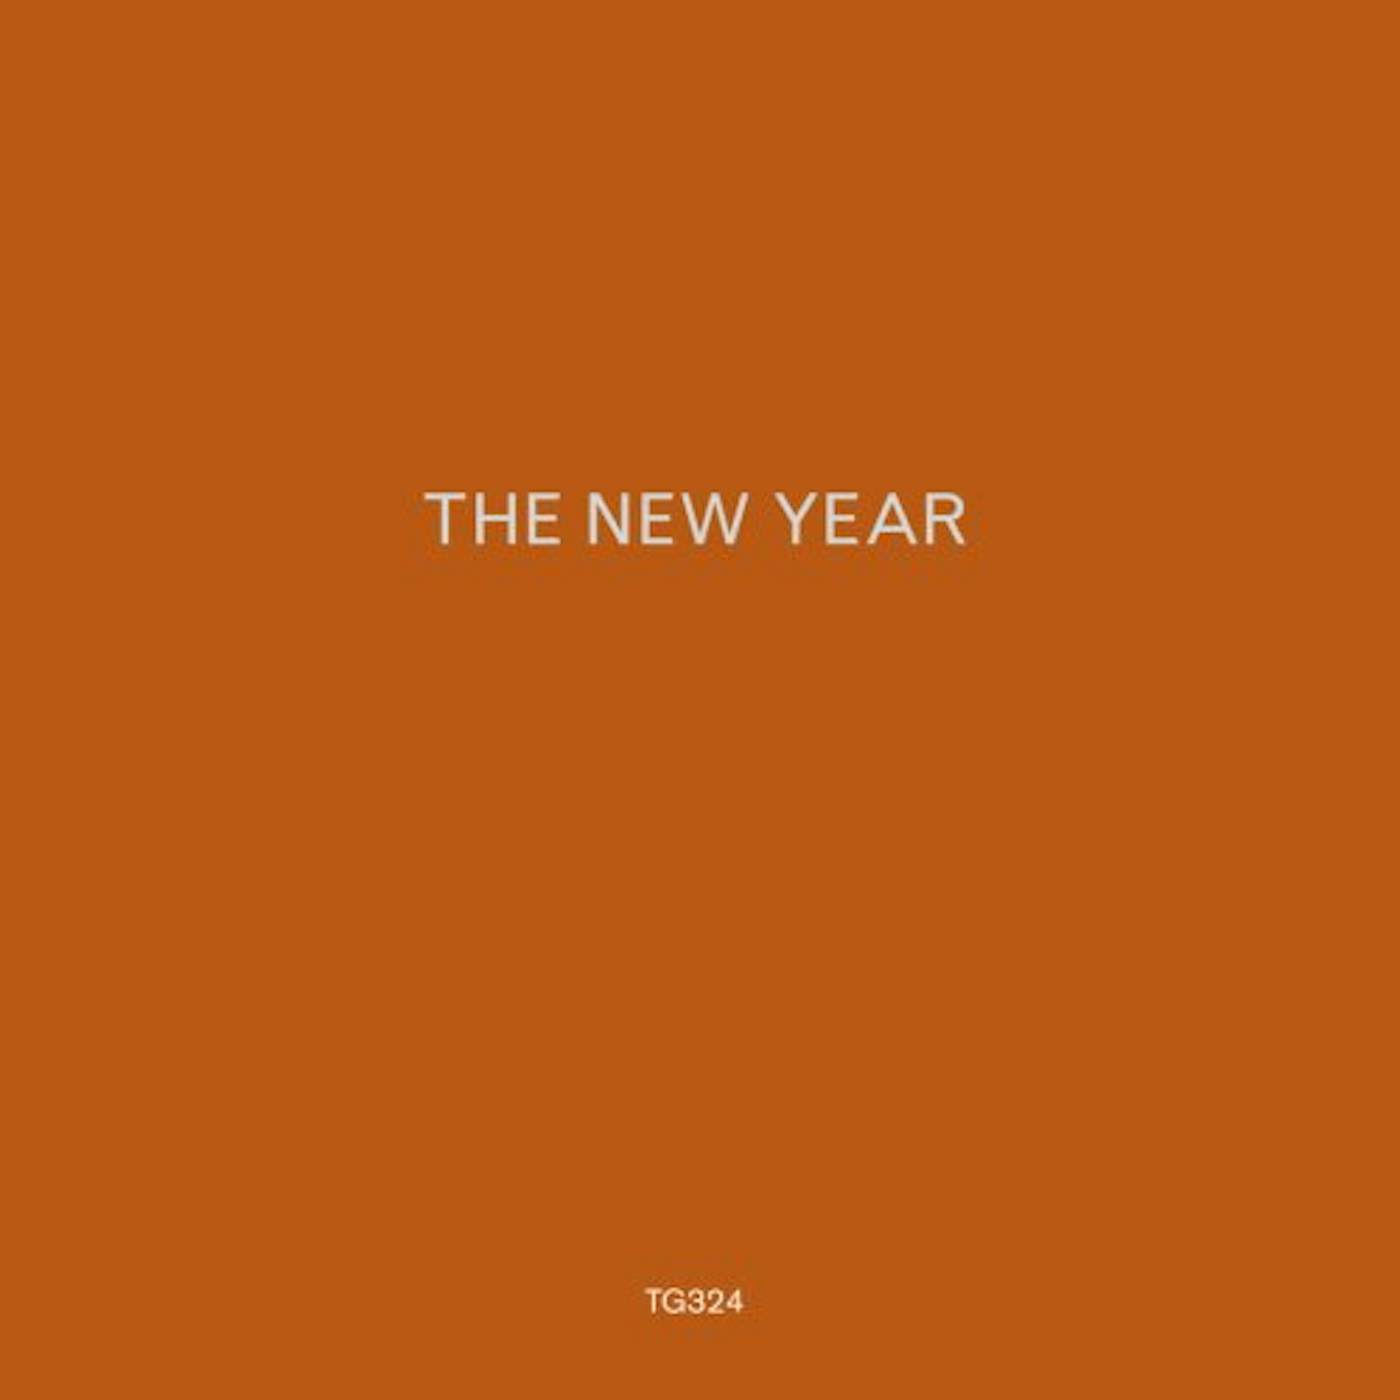 The New Year CD